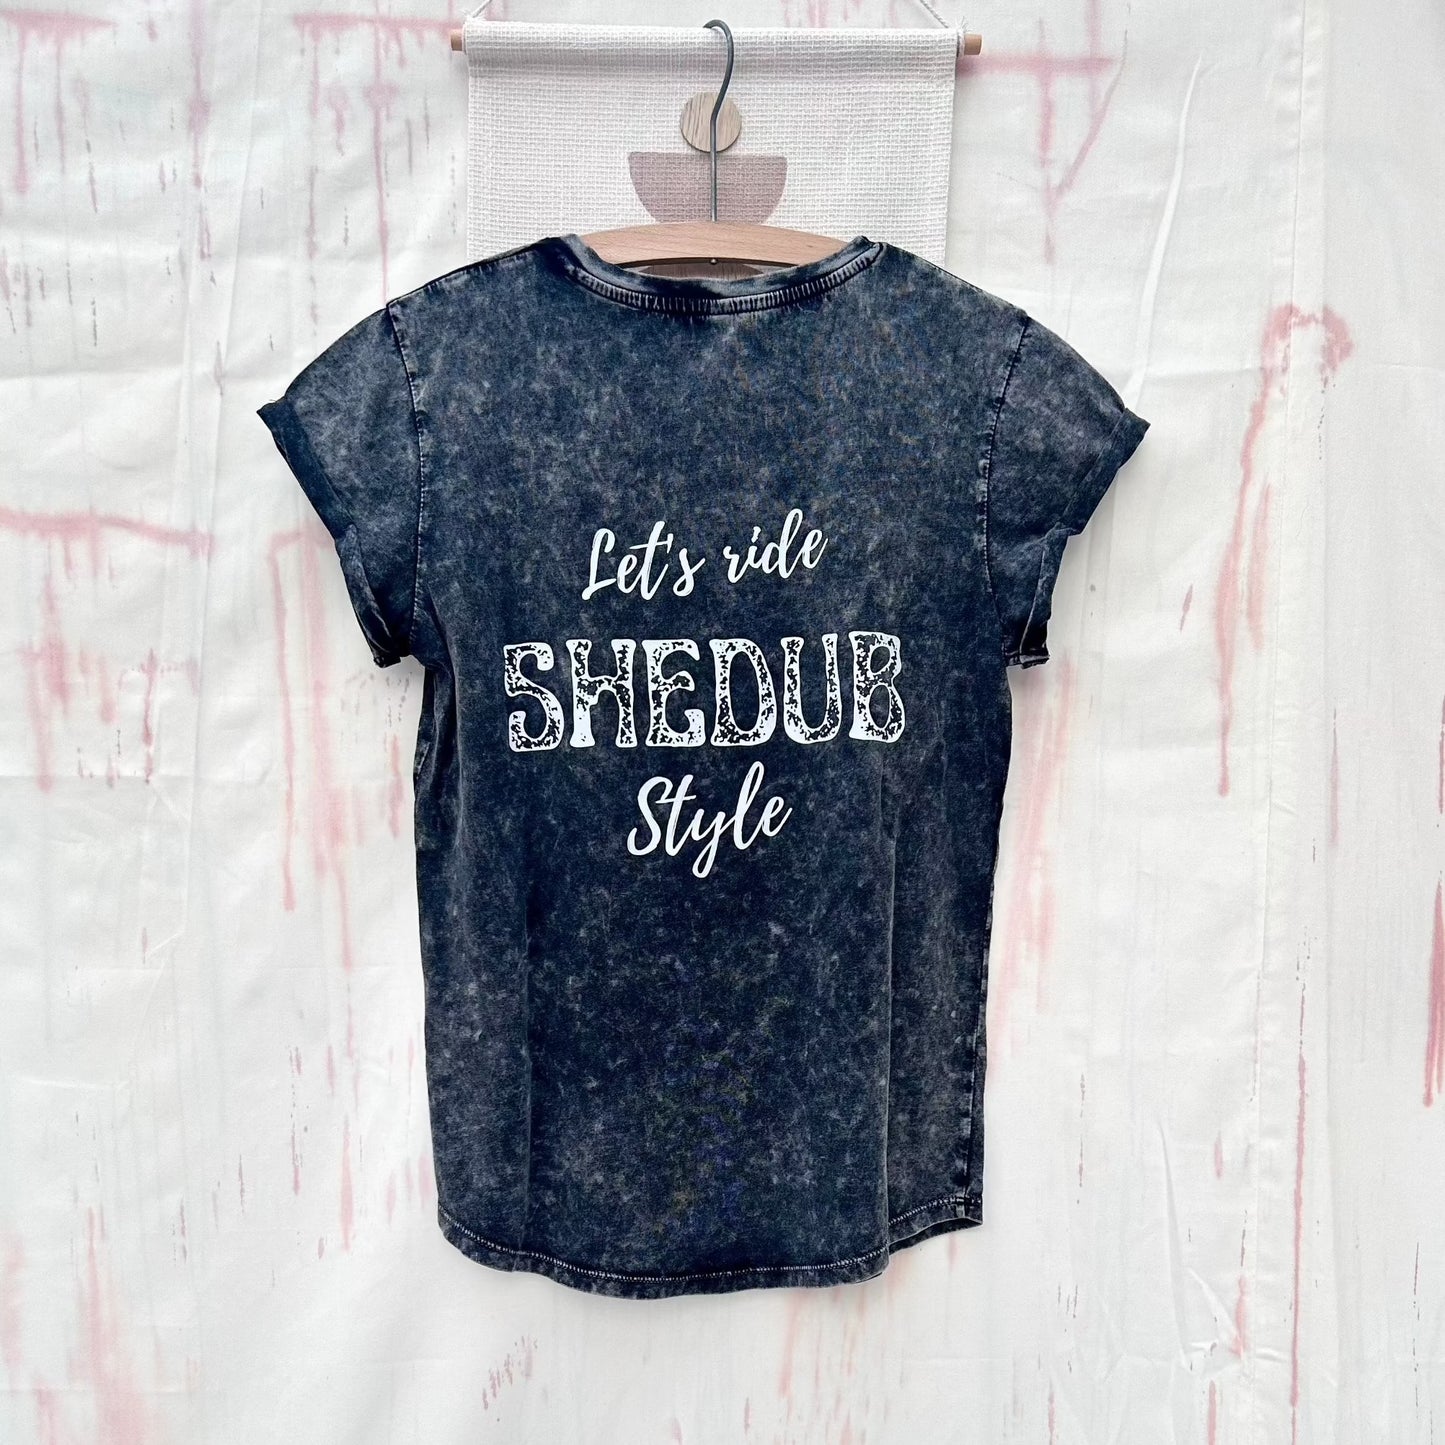 'Let’s ride Shedub style' T shirt